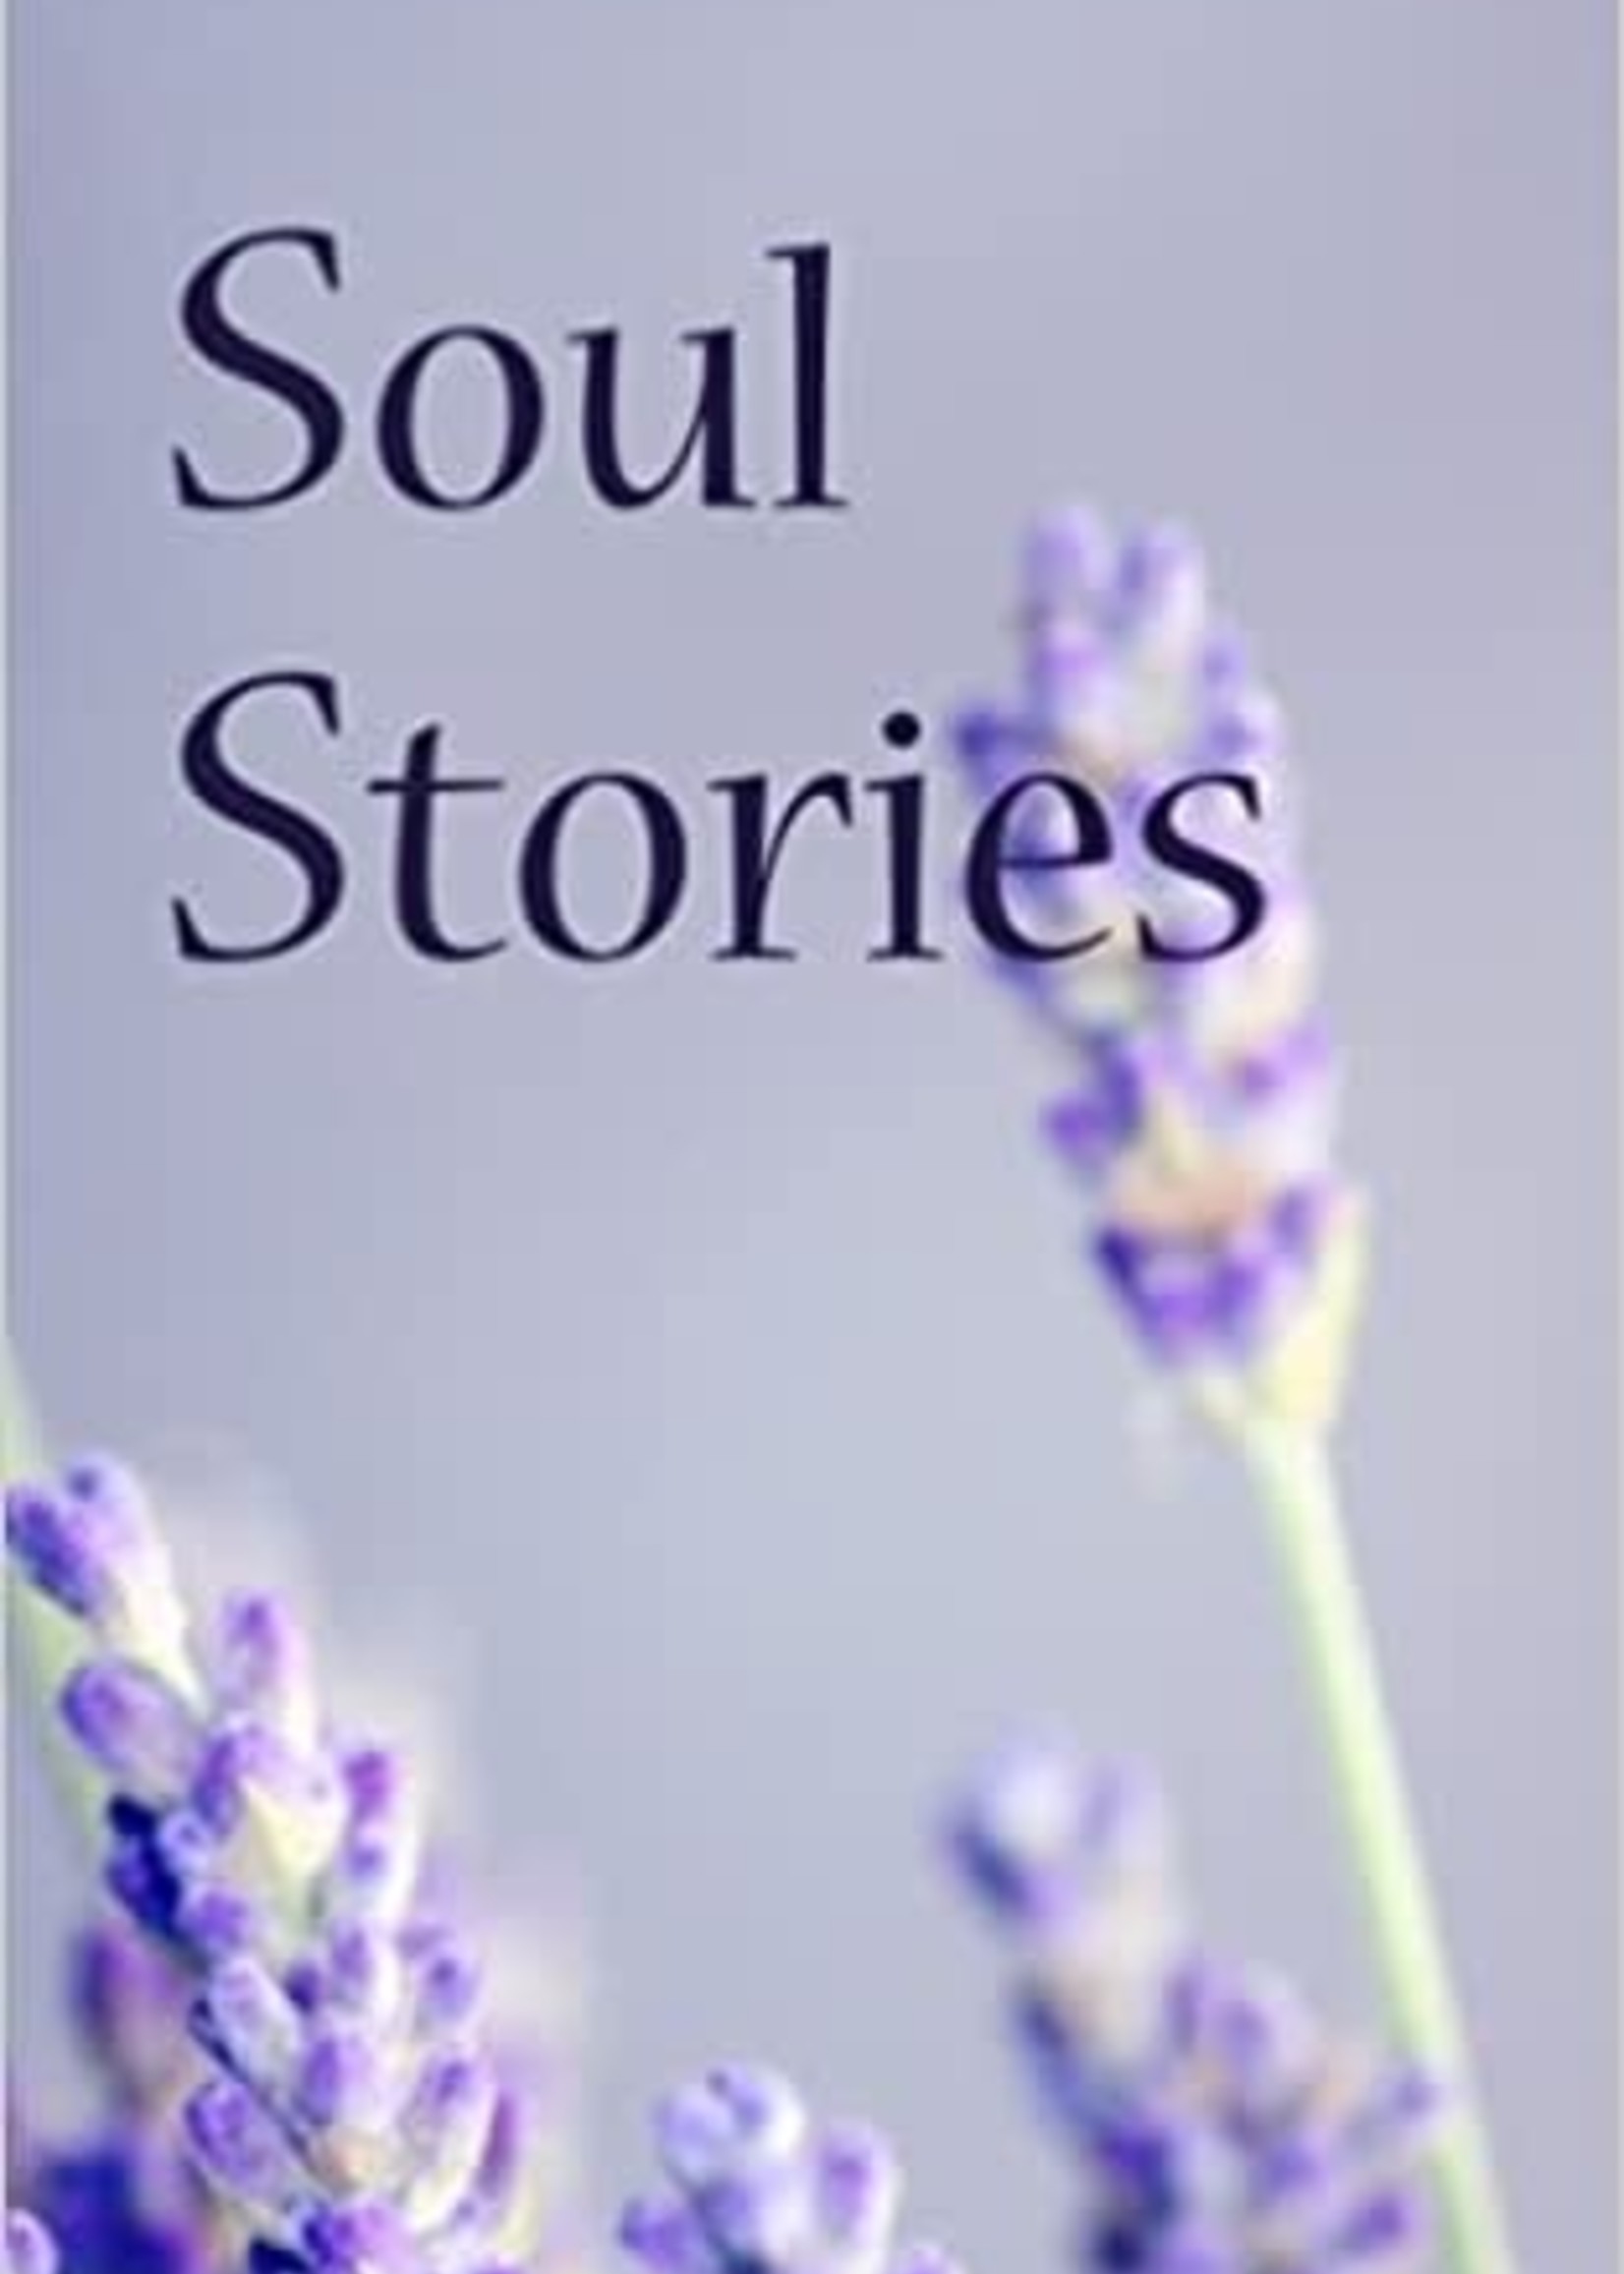 Soul Stories by Judy Johnson